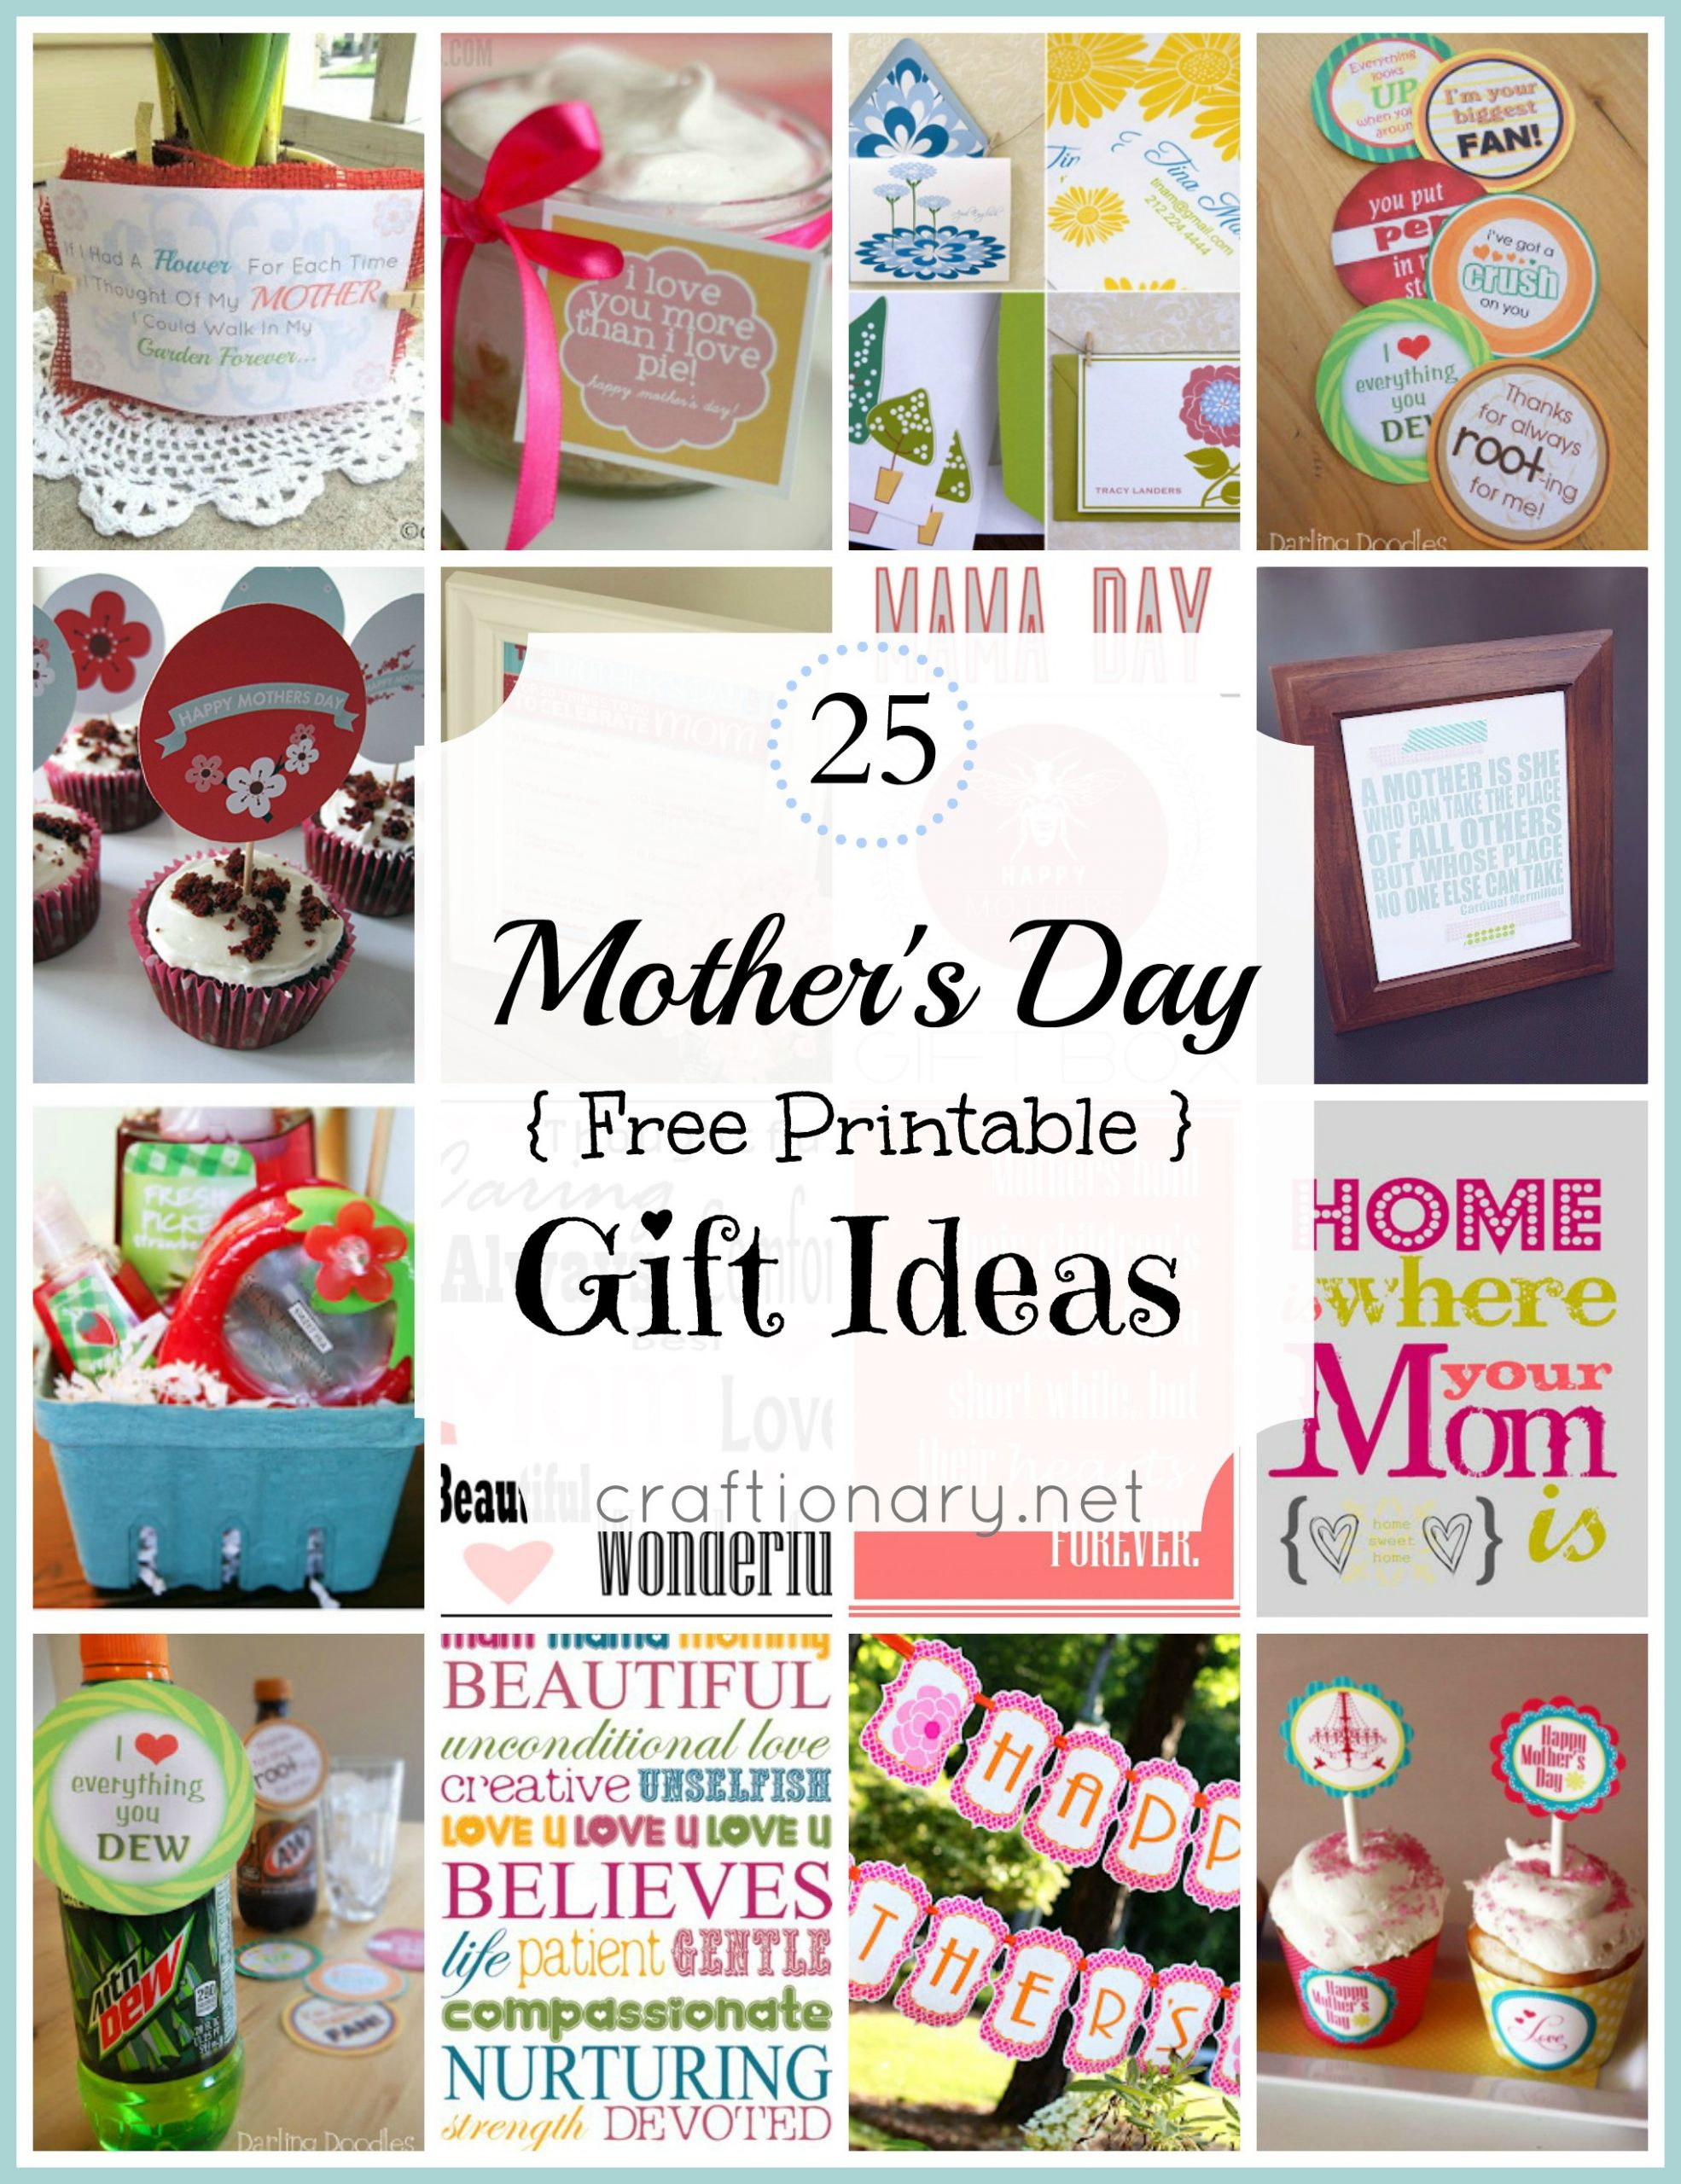 Mother Day Photo Gift Ideas
 Craftionary